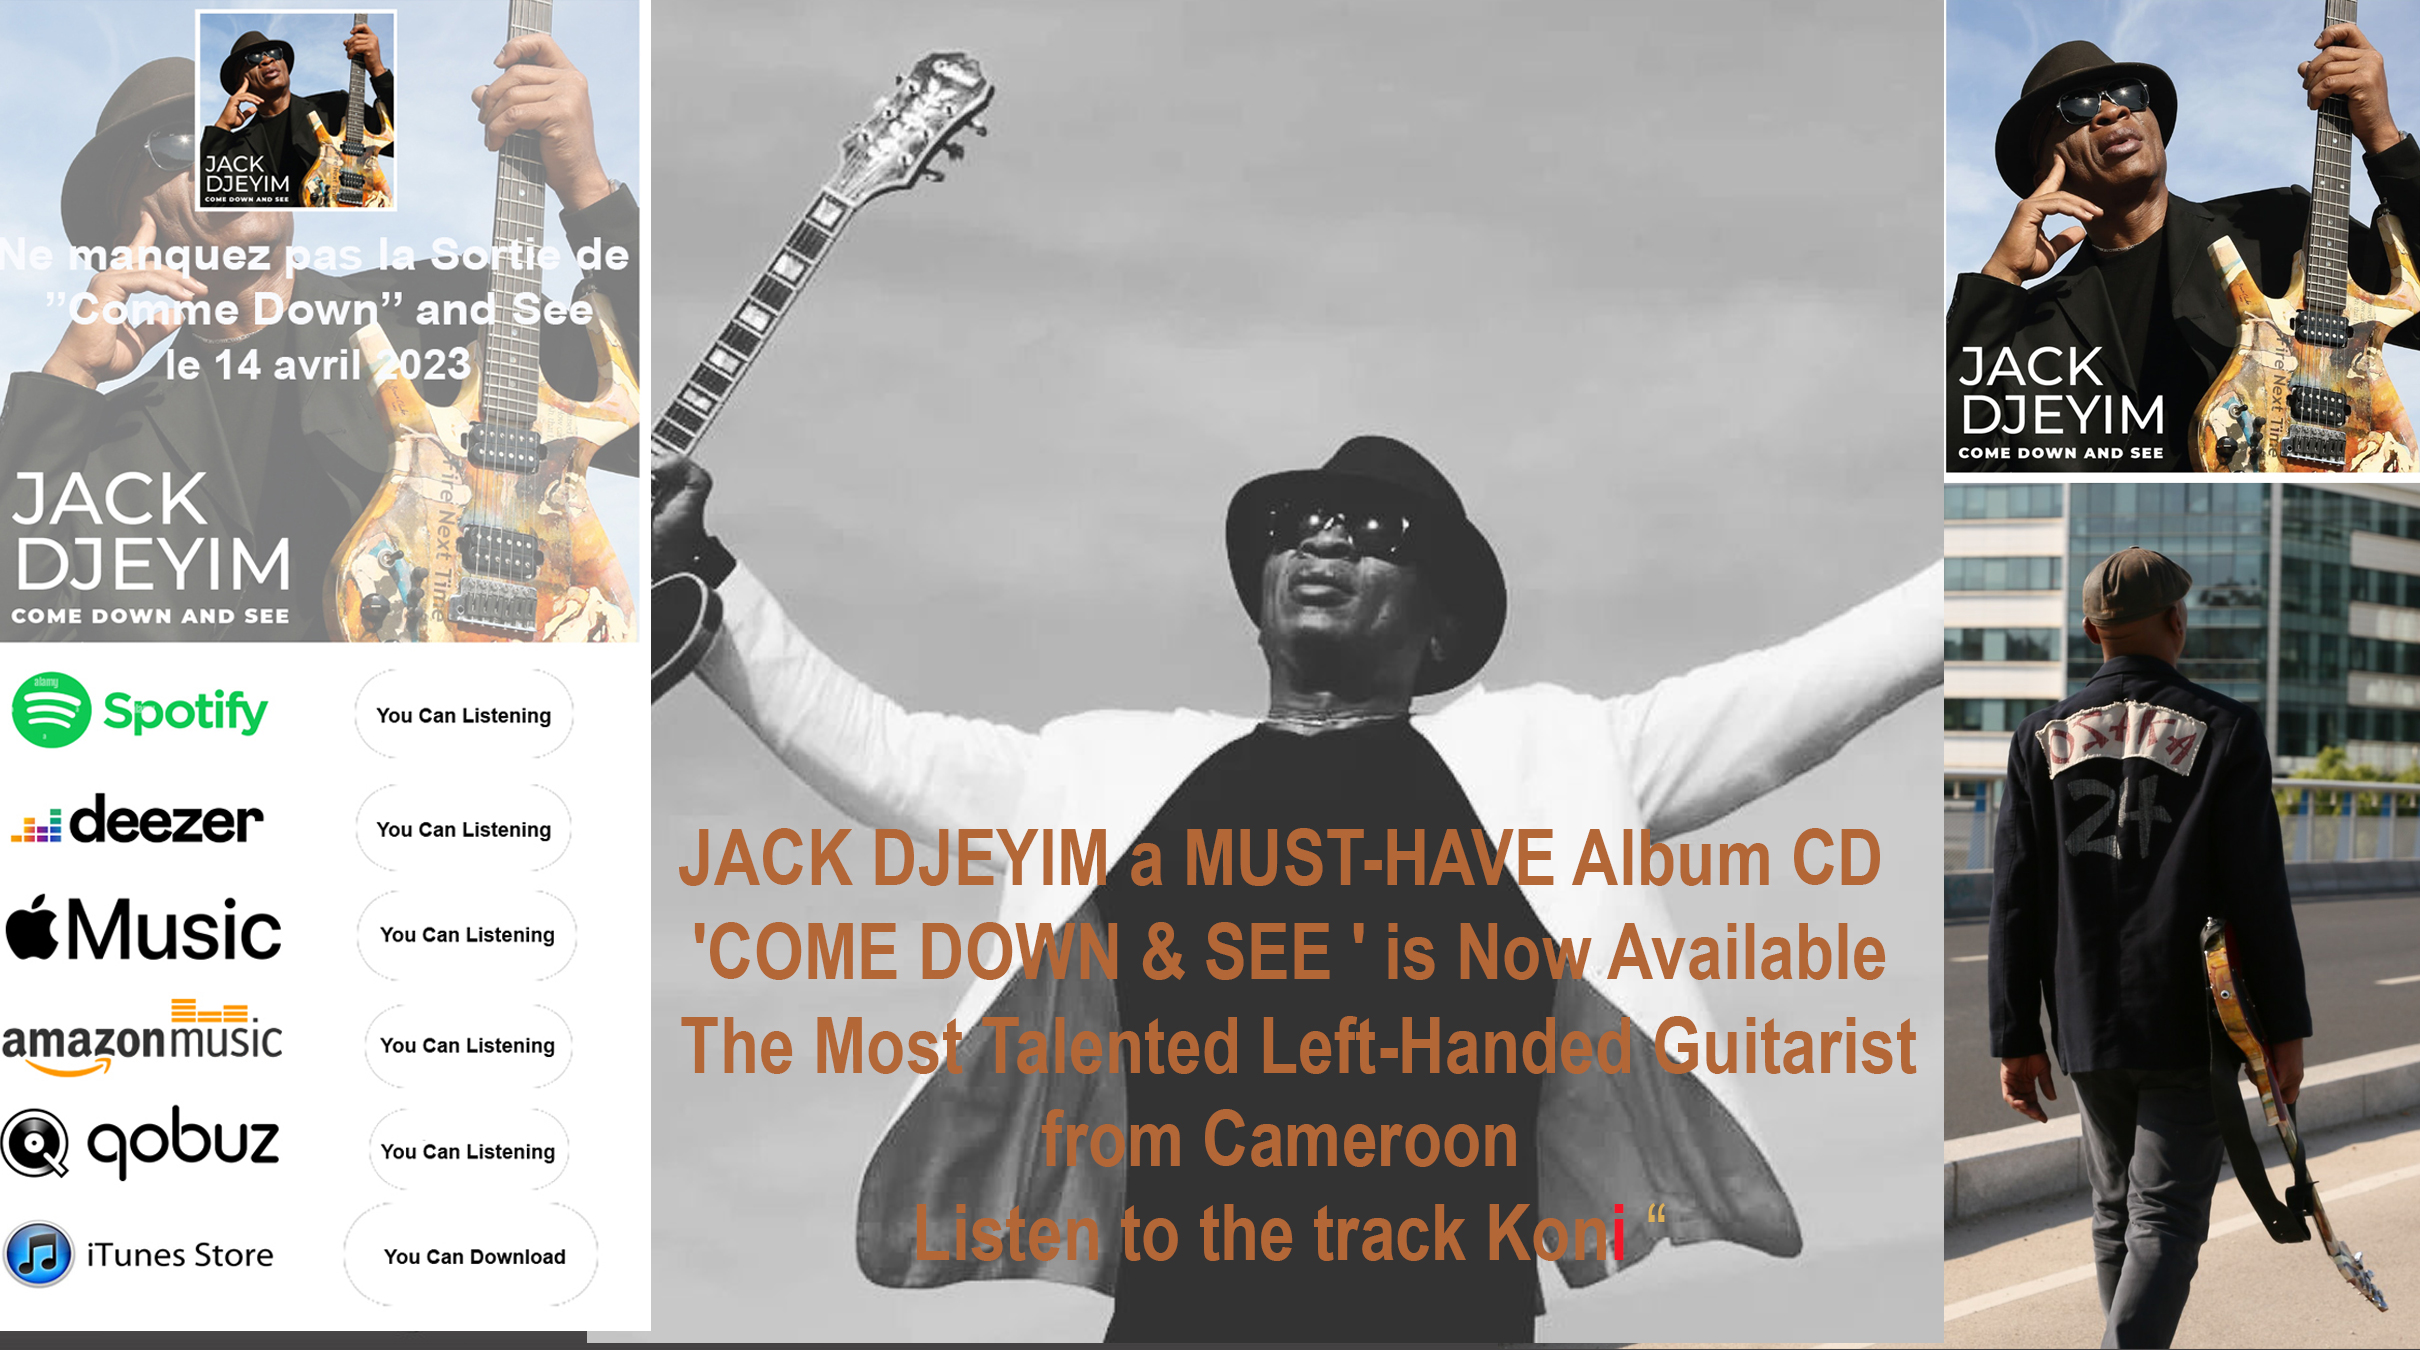 AFRICA-VOGUE-COVER-JACK-DJEYIM-a-MUST-HAVE-Album-CD-COME-DOWN-&-SEE-is-Now-Available-The-Most-Talented-Left-Handed-Guitarist-from-Cameroon-Listen-to-the-track-Koni-DN-AFRICA-MEDIA-PARTNER